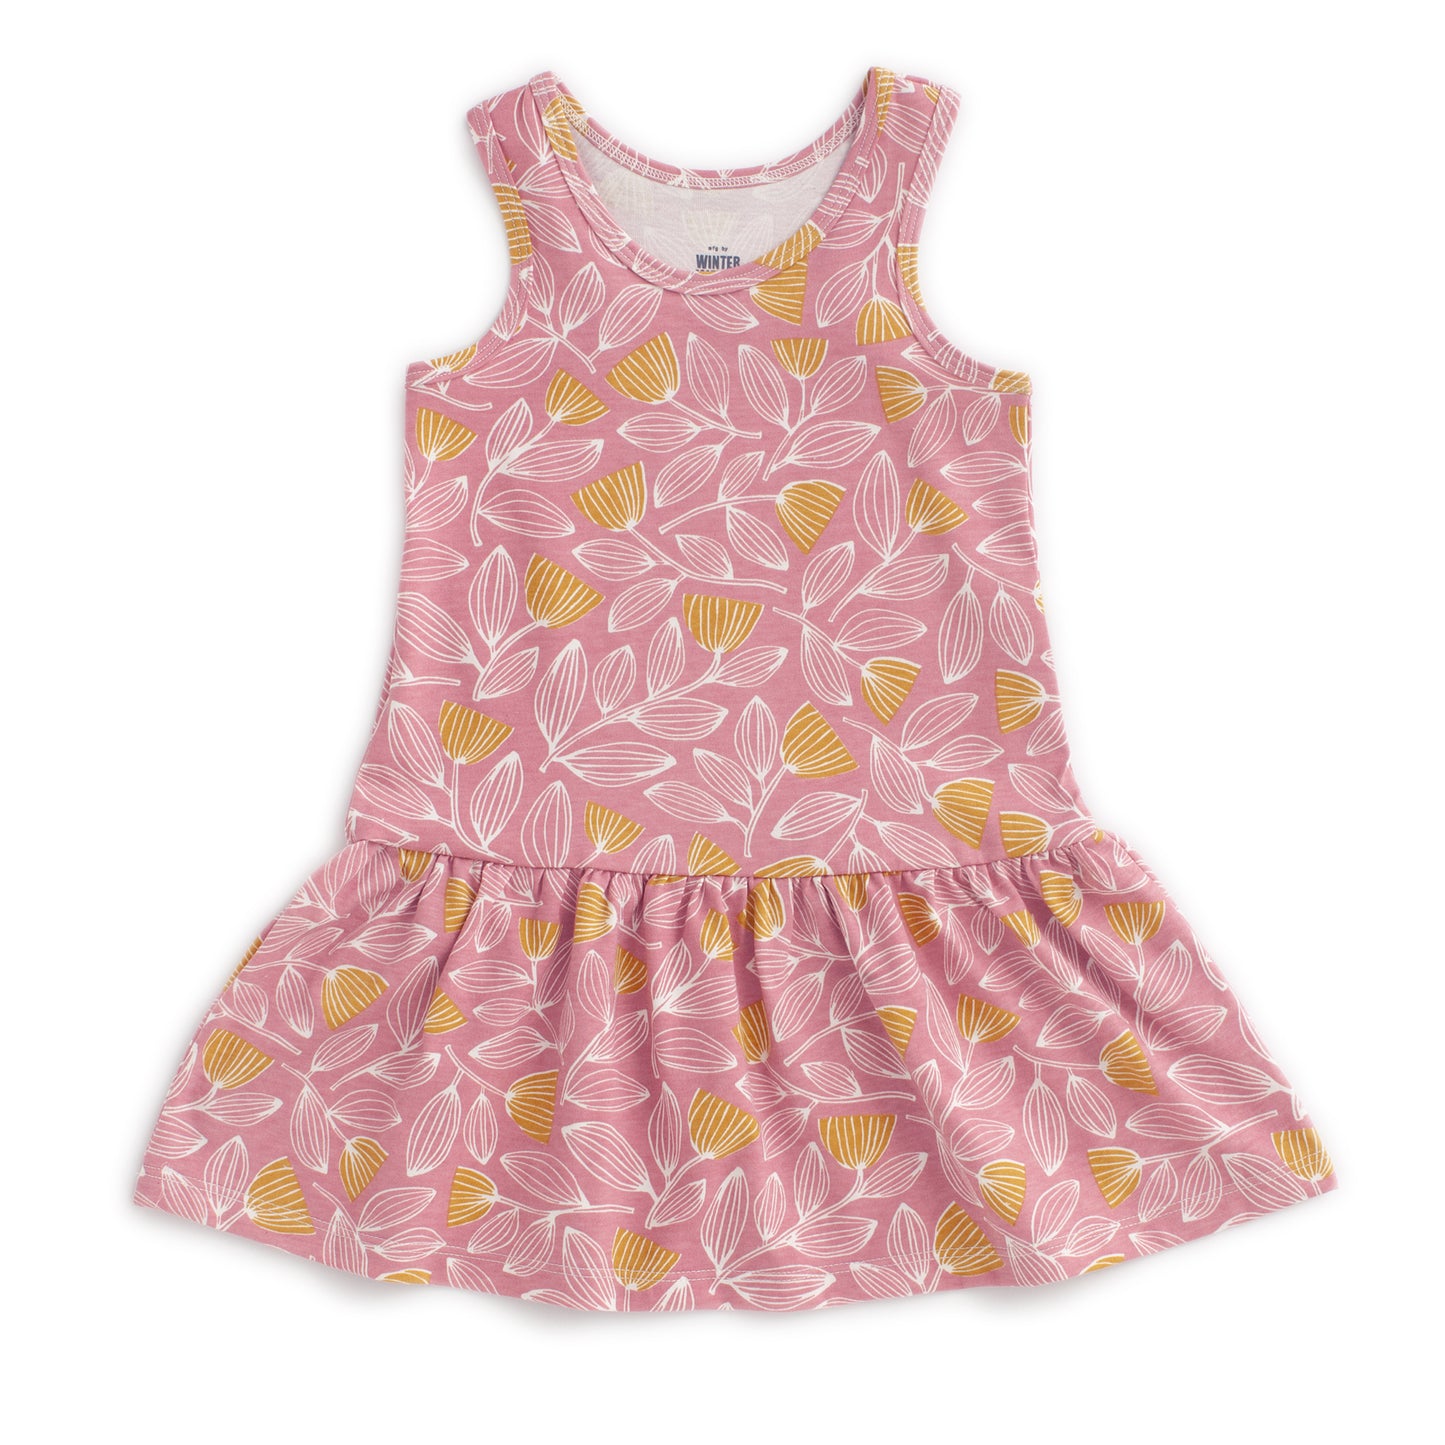 Valencia Dress - Holland Floral Dusty Pink & Yellow